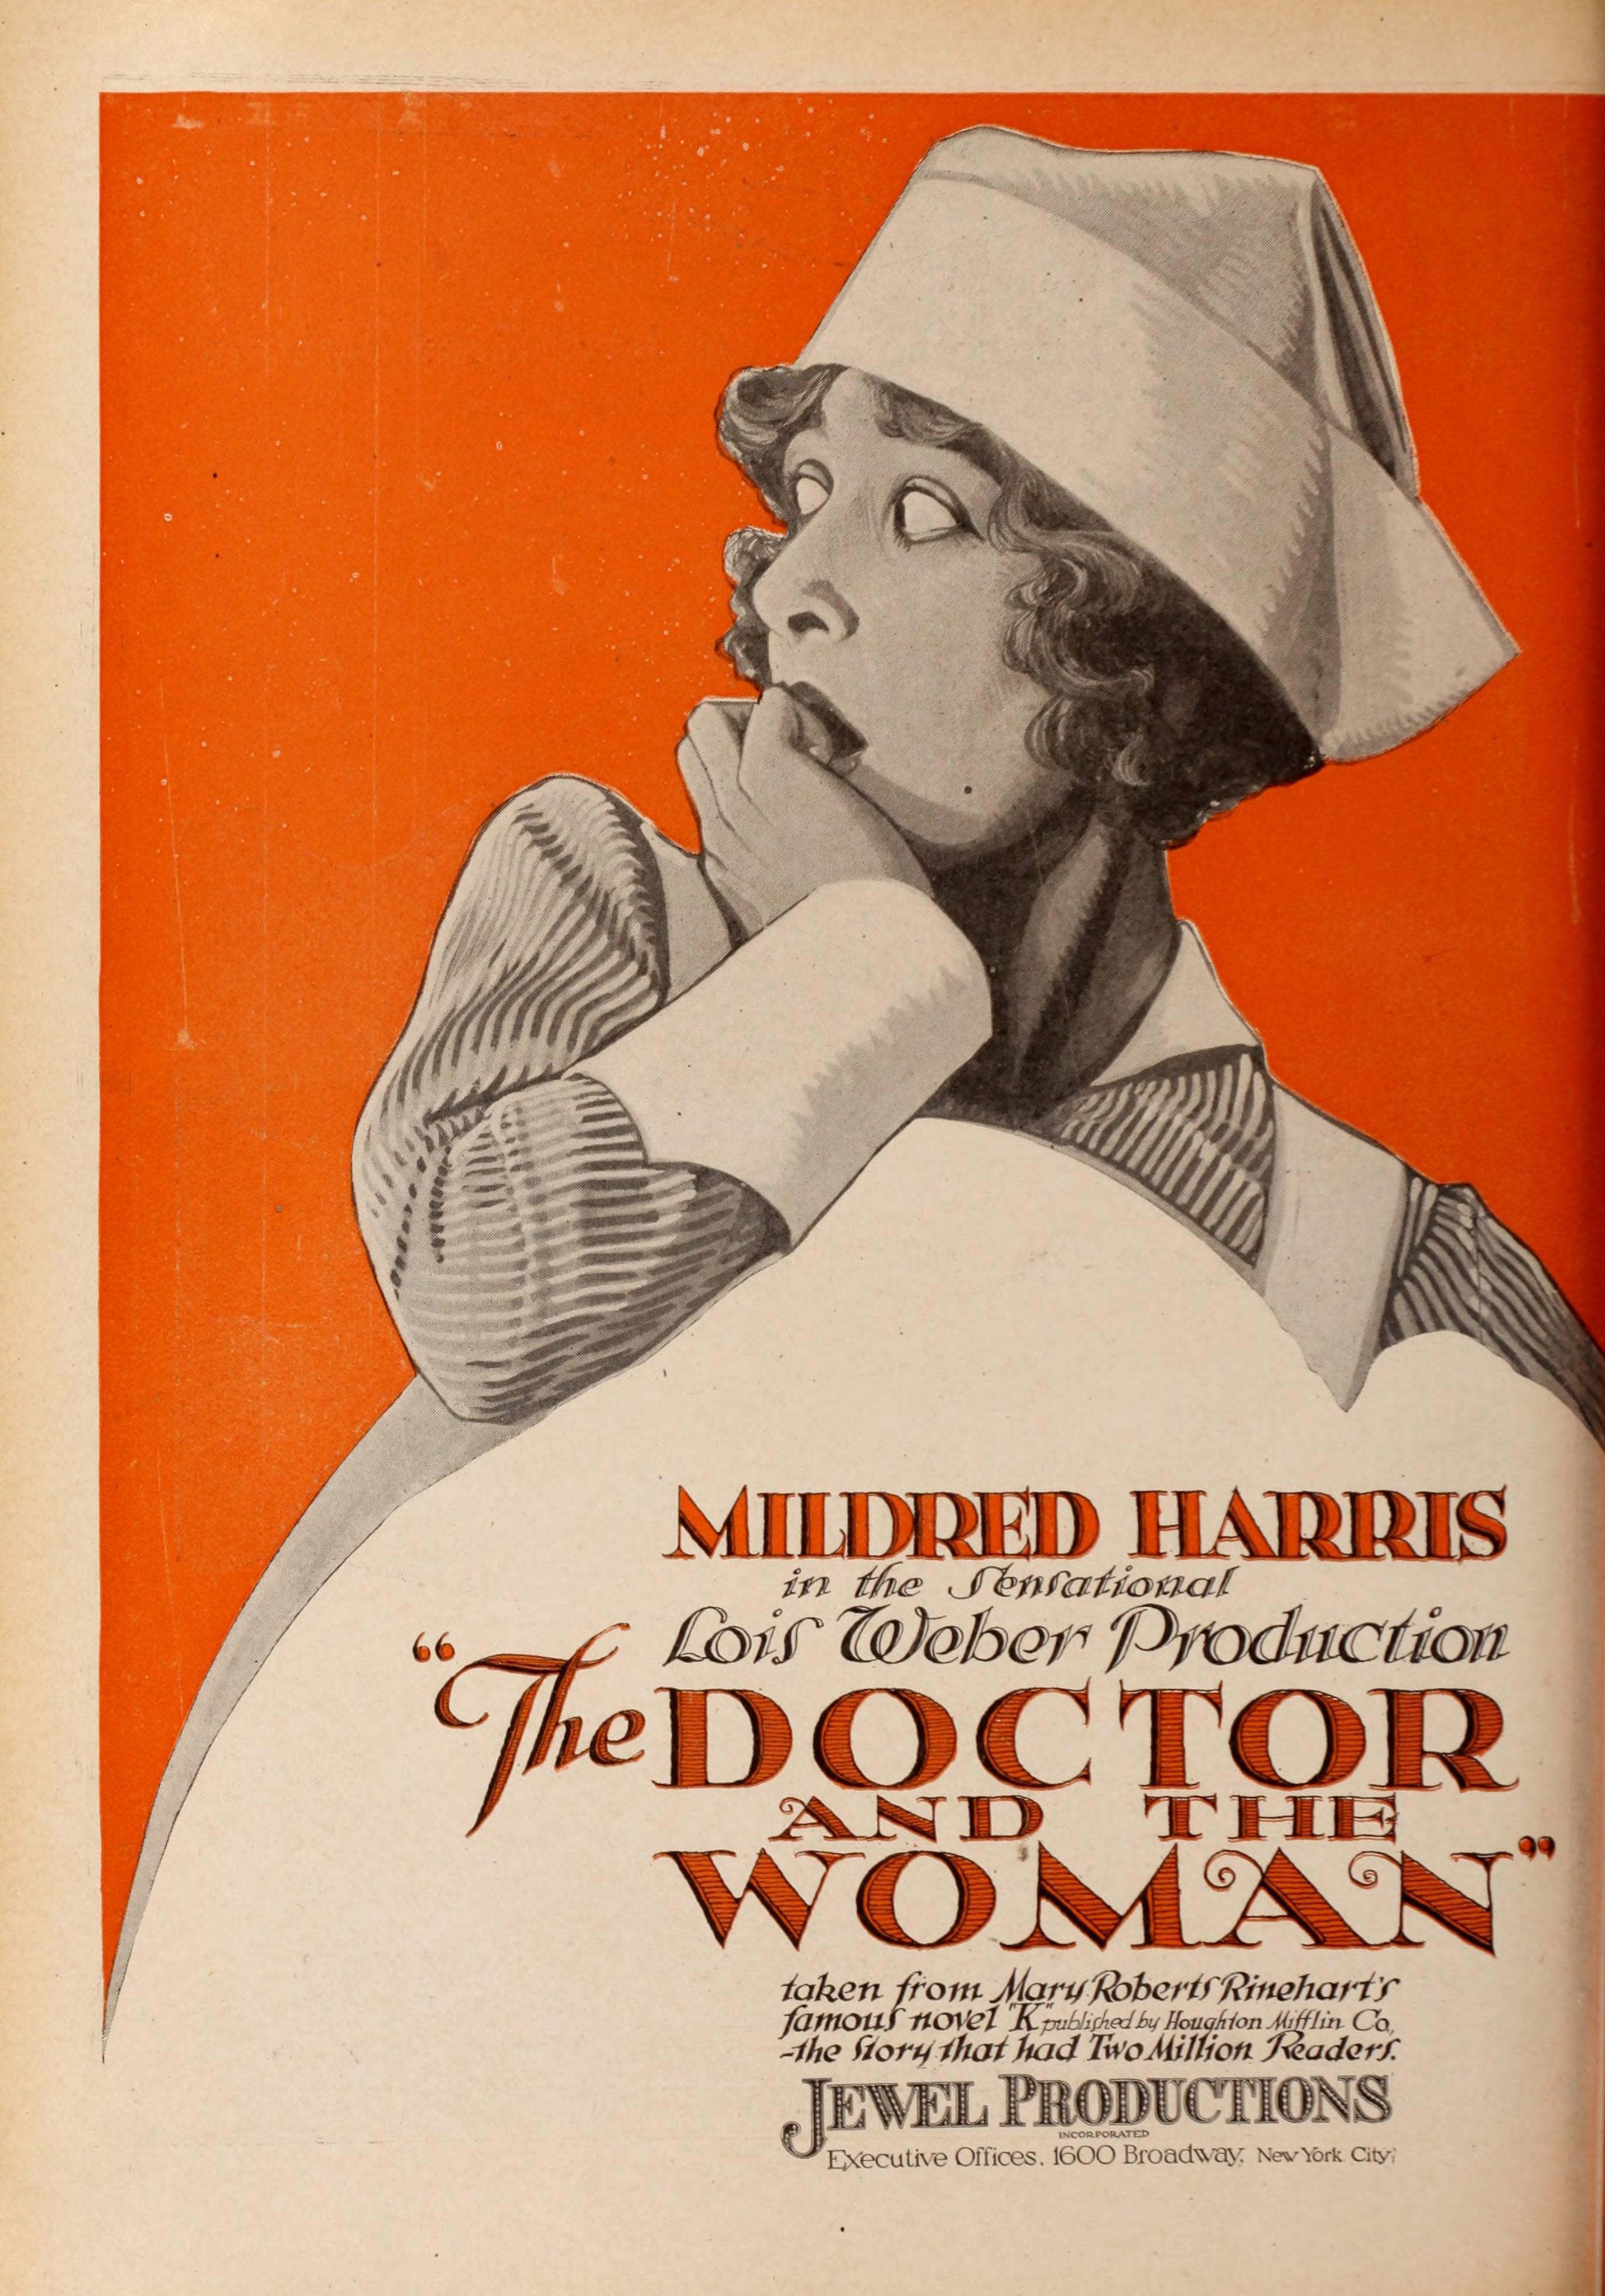 The Doctor and the Woman (1918) | www.vintoz.com